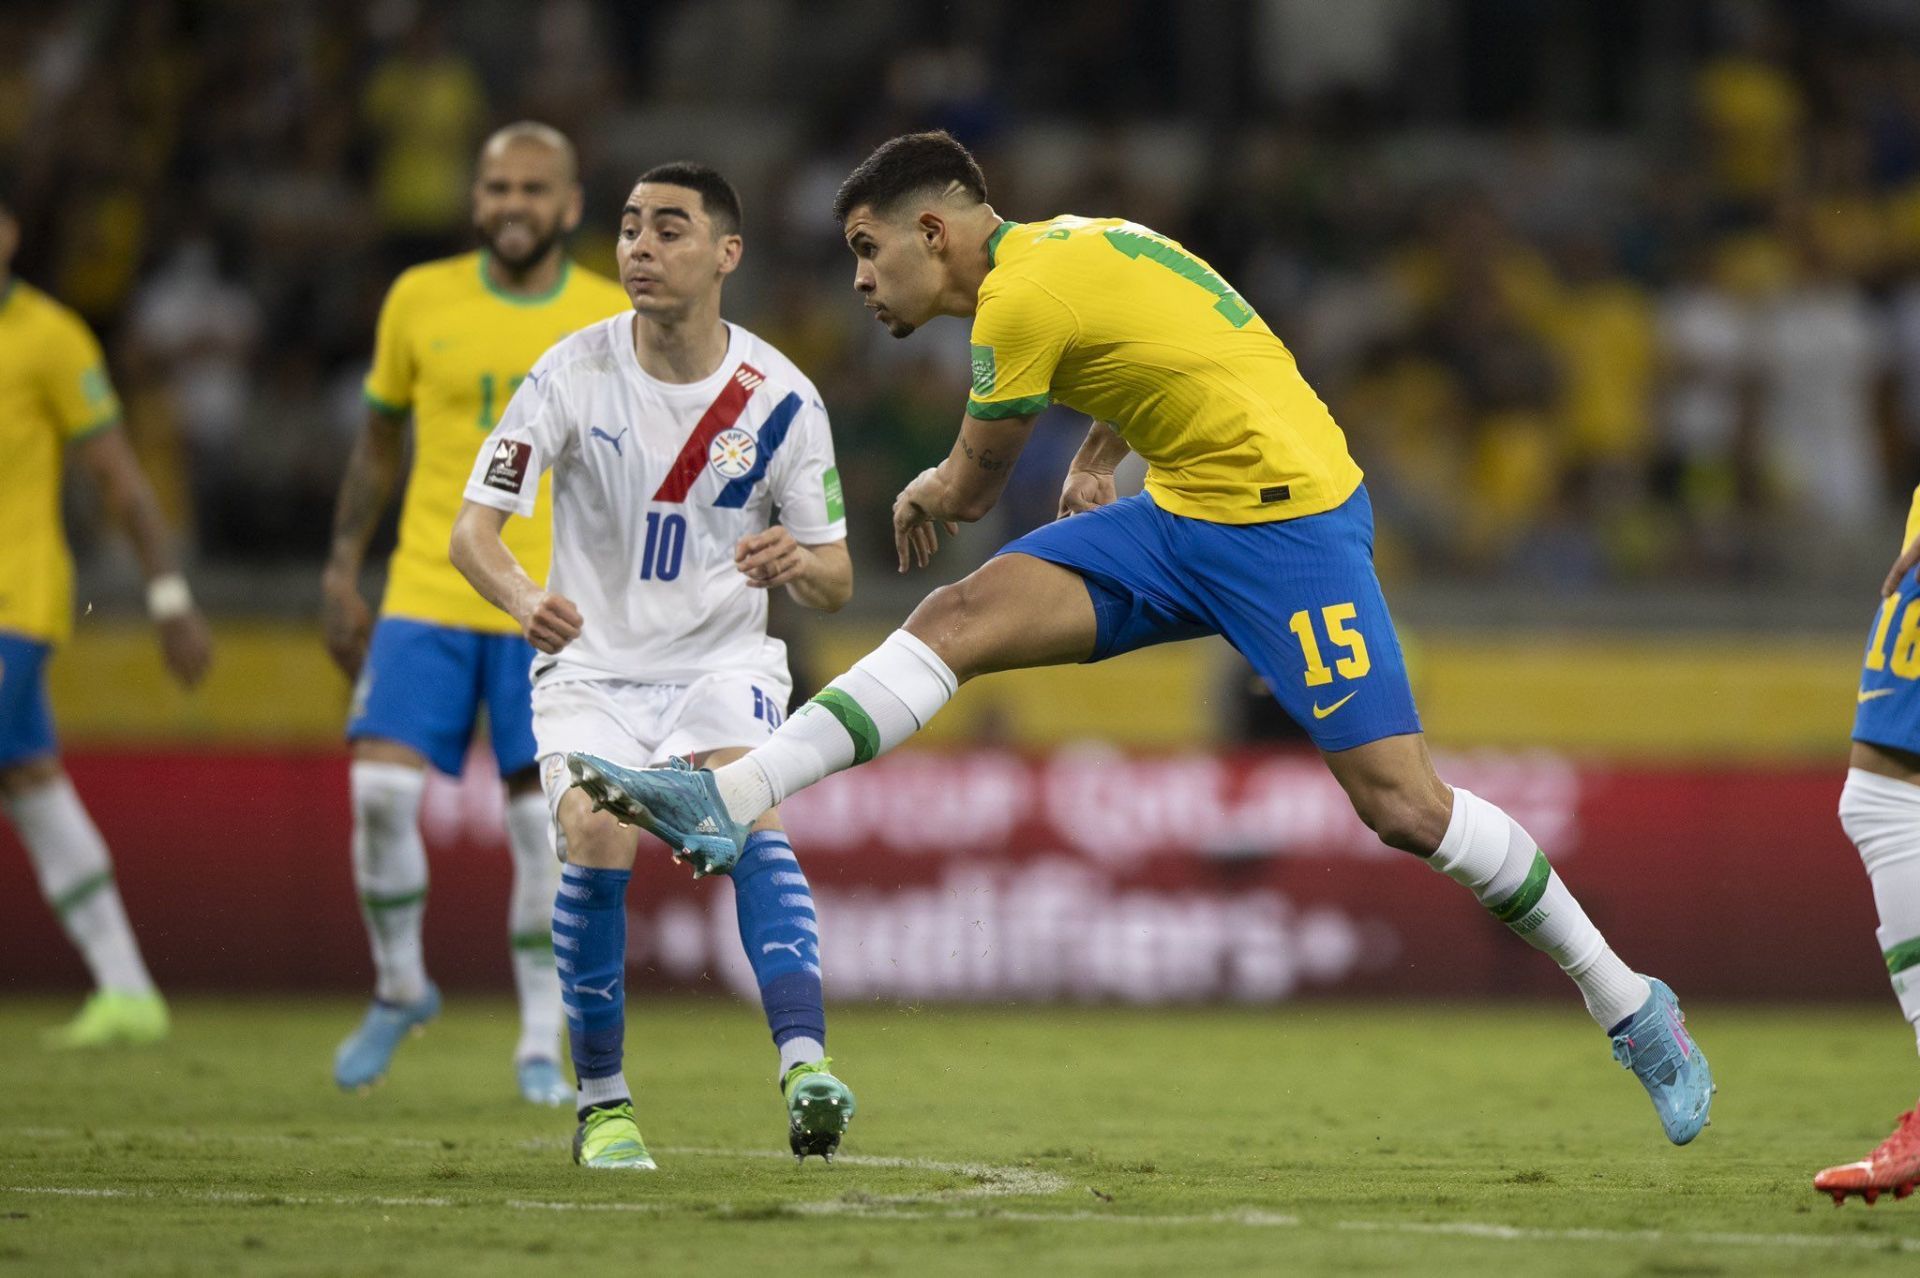 Brazil ended their two-game winless run by thrashing Paraguay